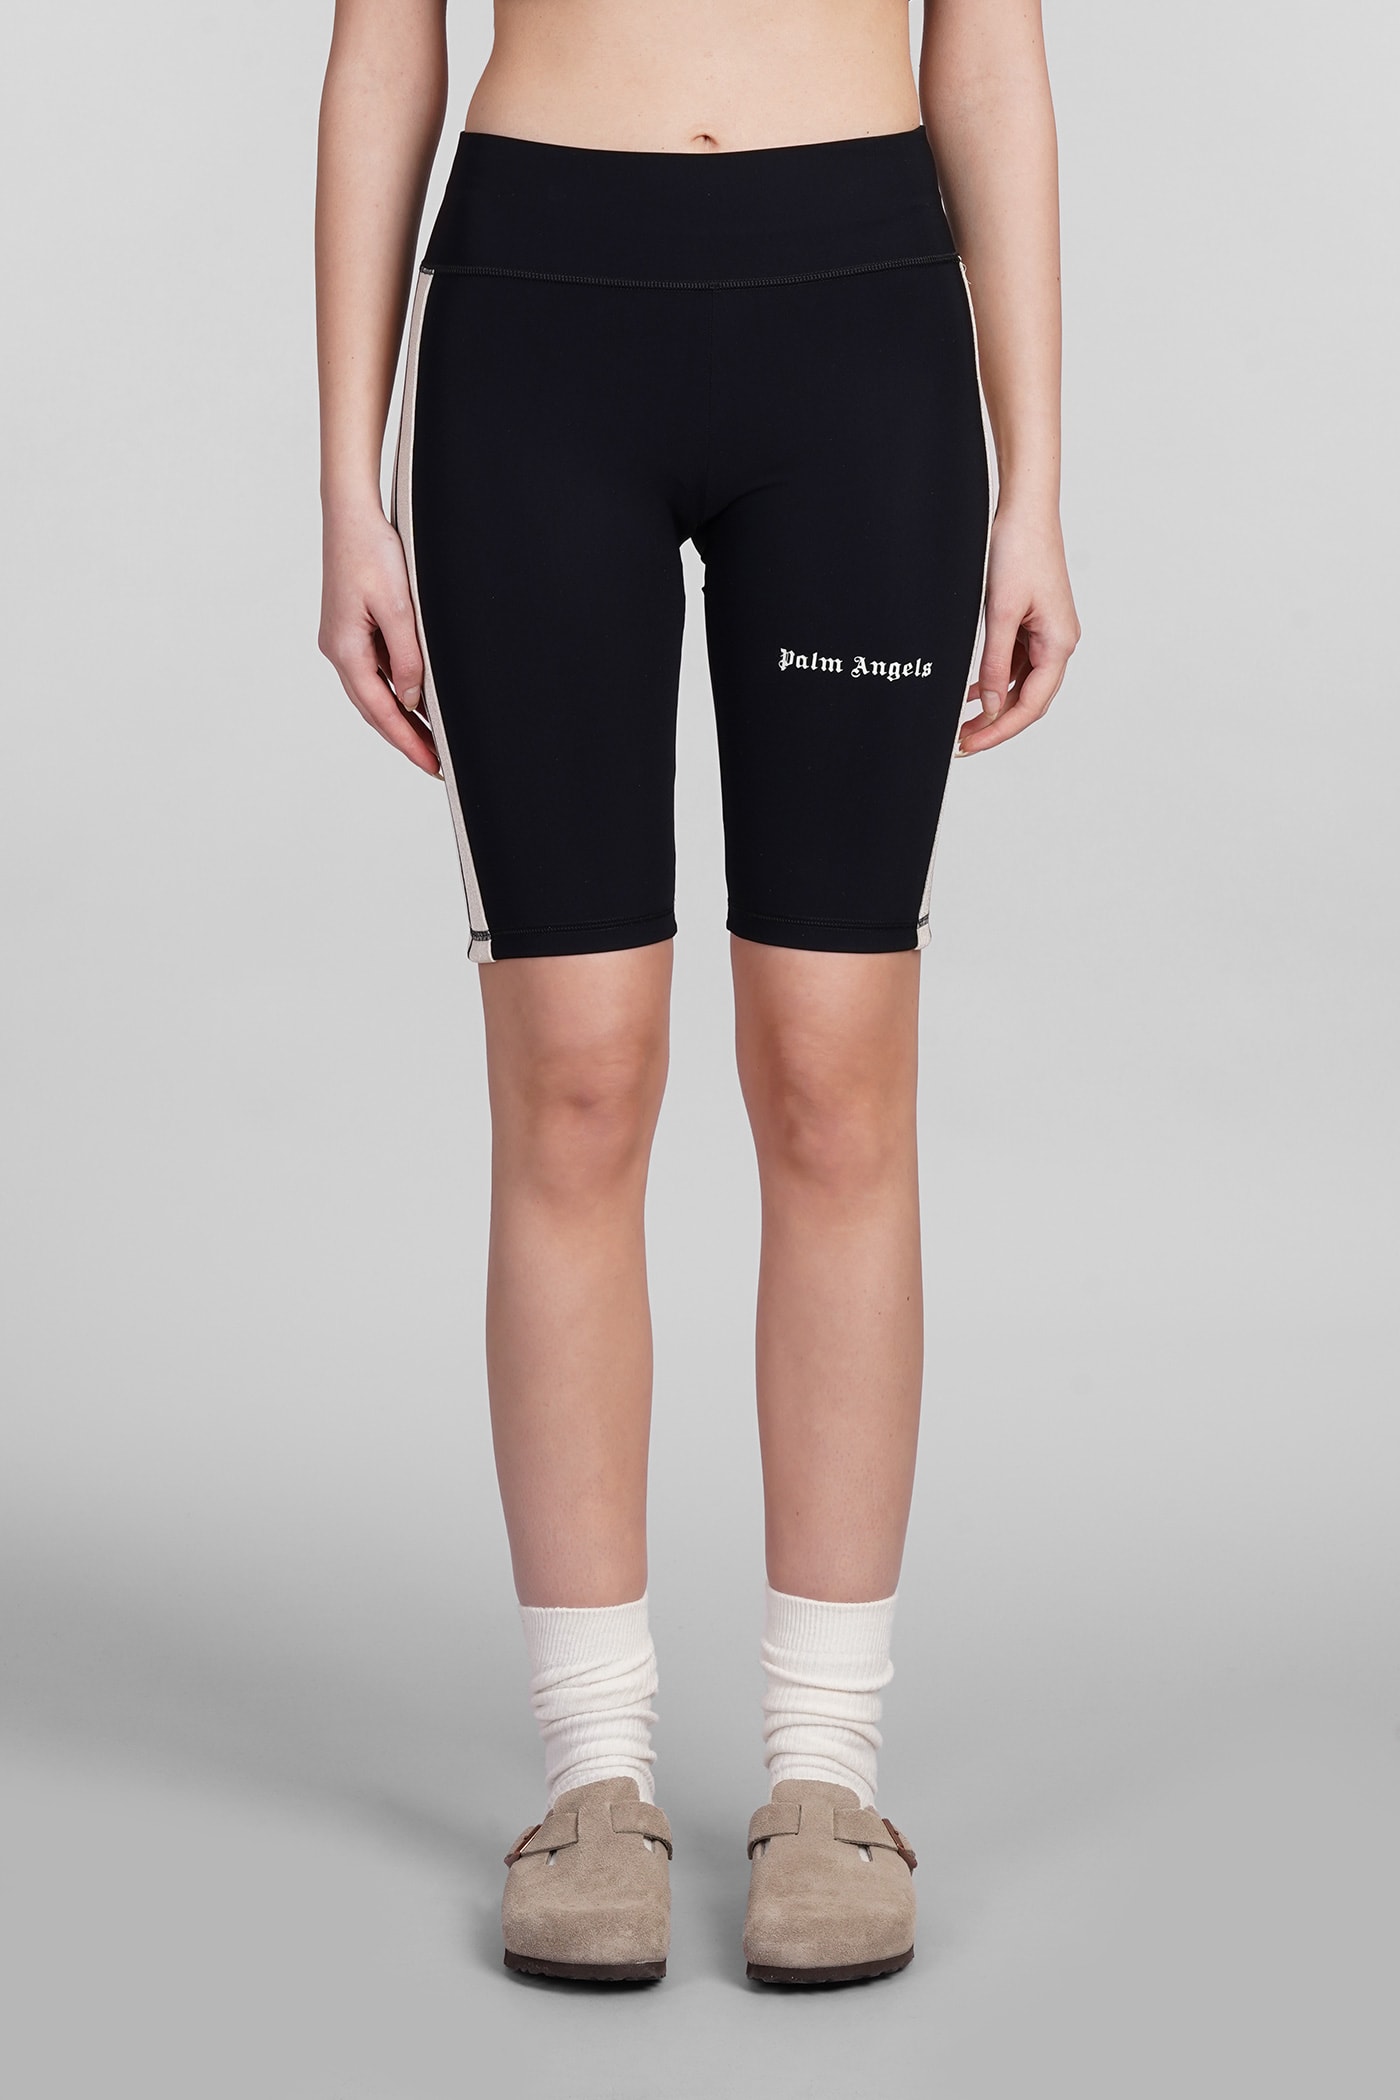 Palm Angels Shorts In Black Polyamide